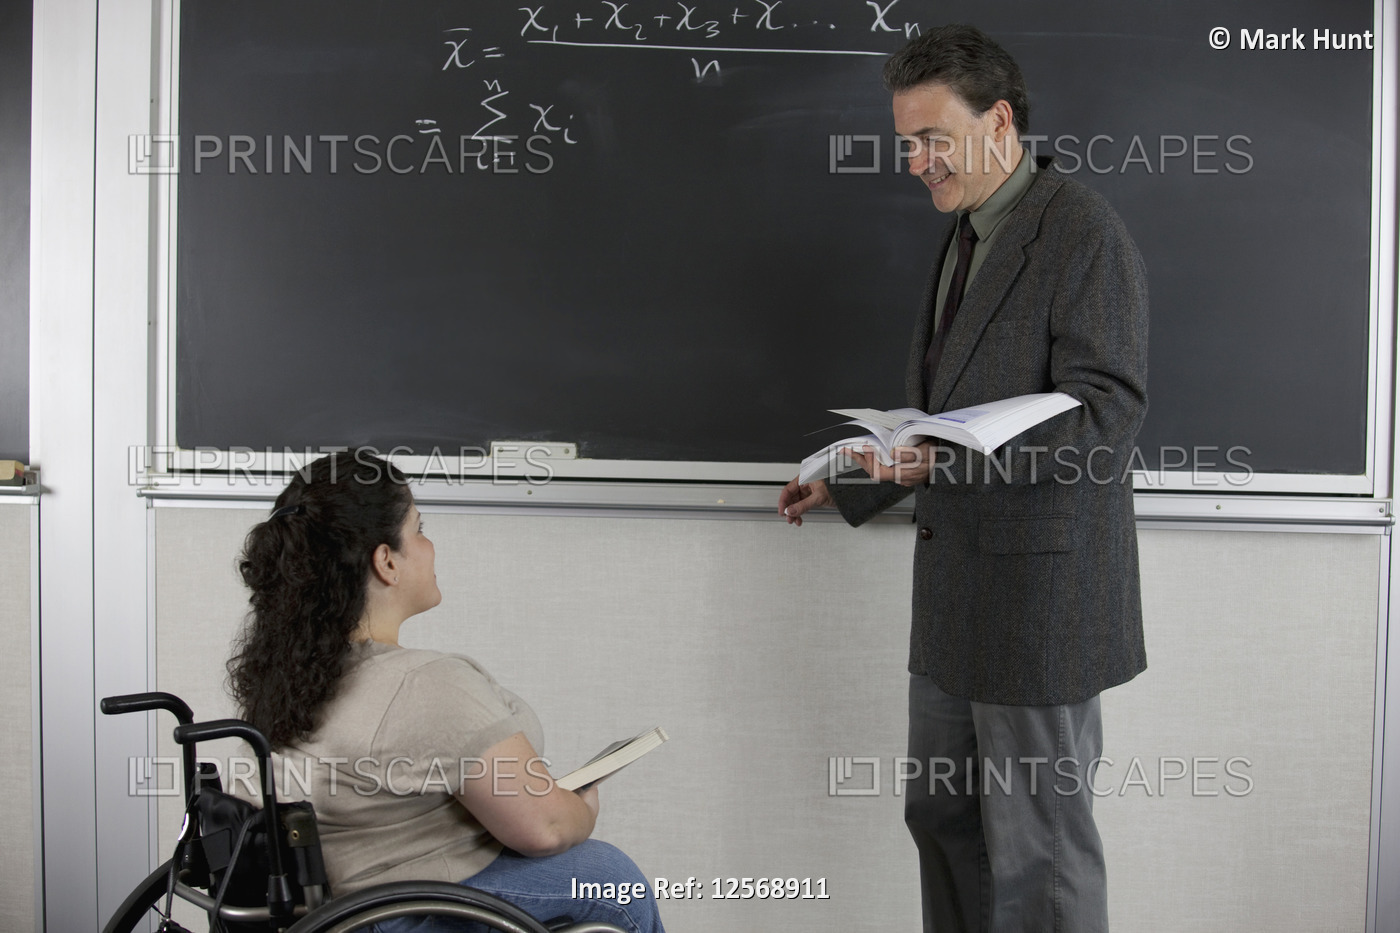 Professor and student with Spina Bifida in a classroom